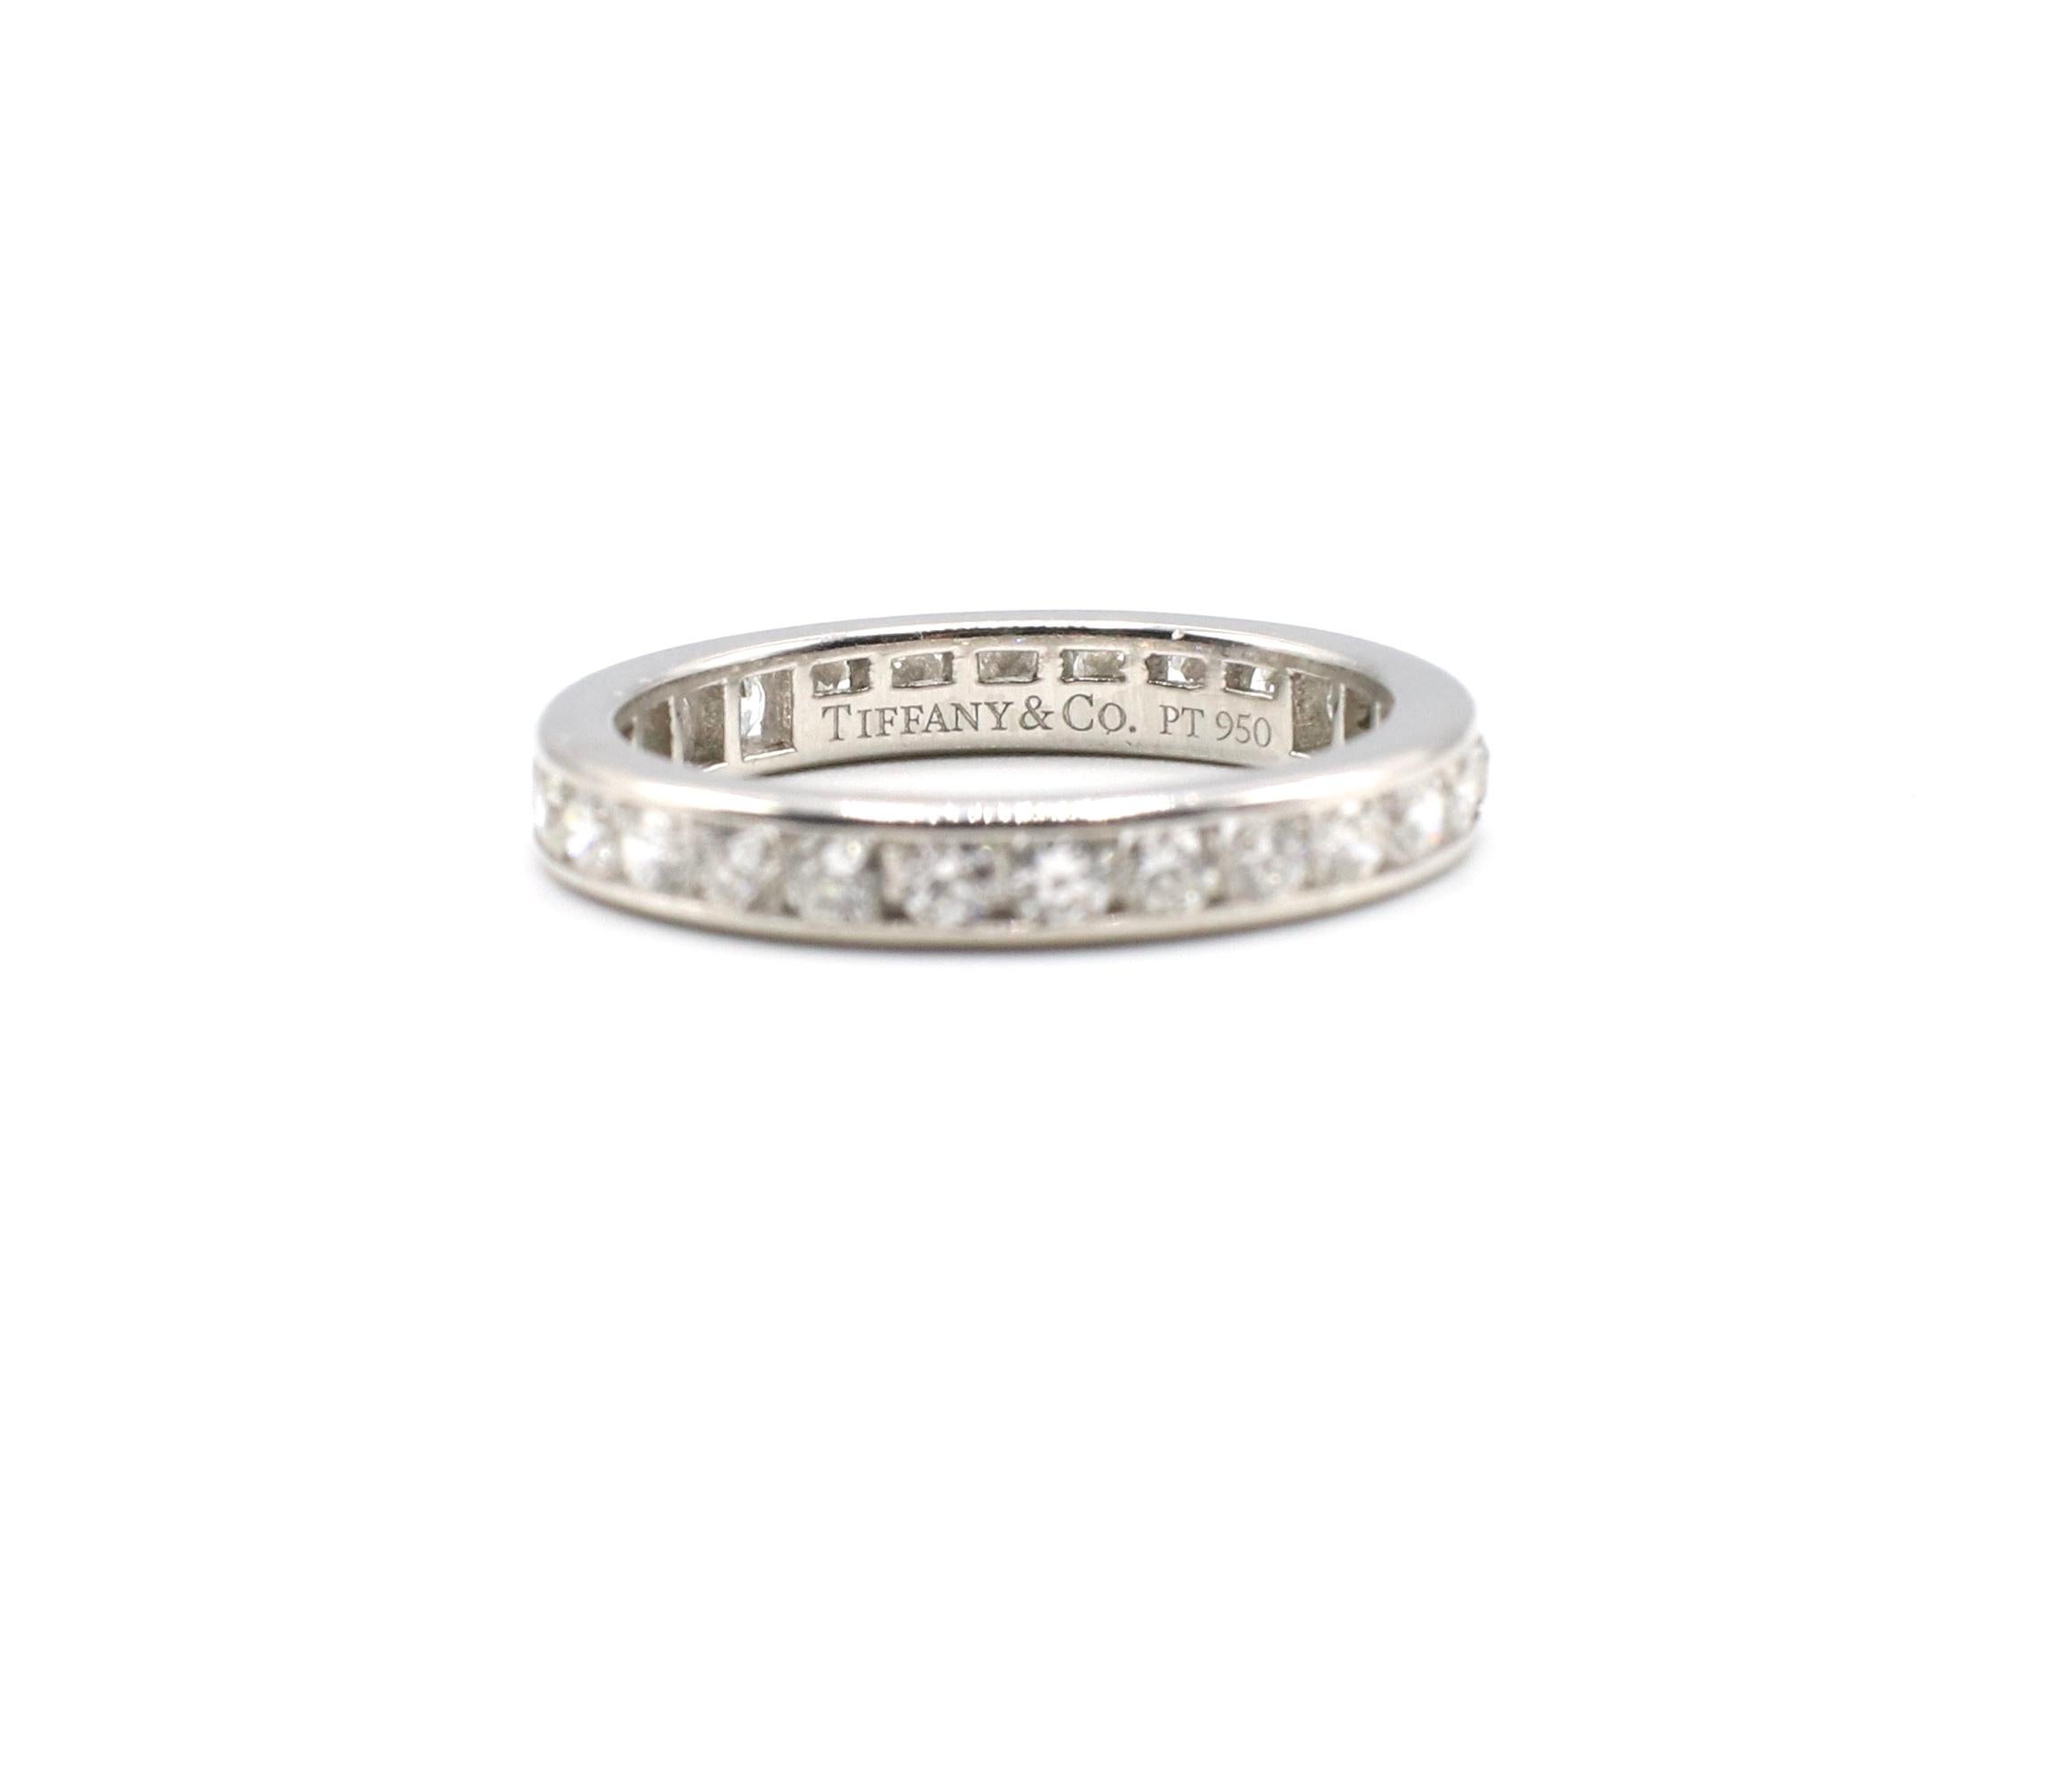 Tiffany & Co Platinum Diamond Wedding Ring 3mm Band Ring Channel Set Round Brilliant Cut Diamonds, .93 CTW With Boxes

Metal: Platinum
Weight: 3.42 grams
Diamonds: 27 round brilliant cut diamonds, approx. .93 CTW G VS 
Finger Size: 5
Signed: